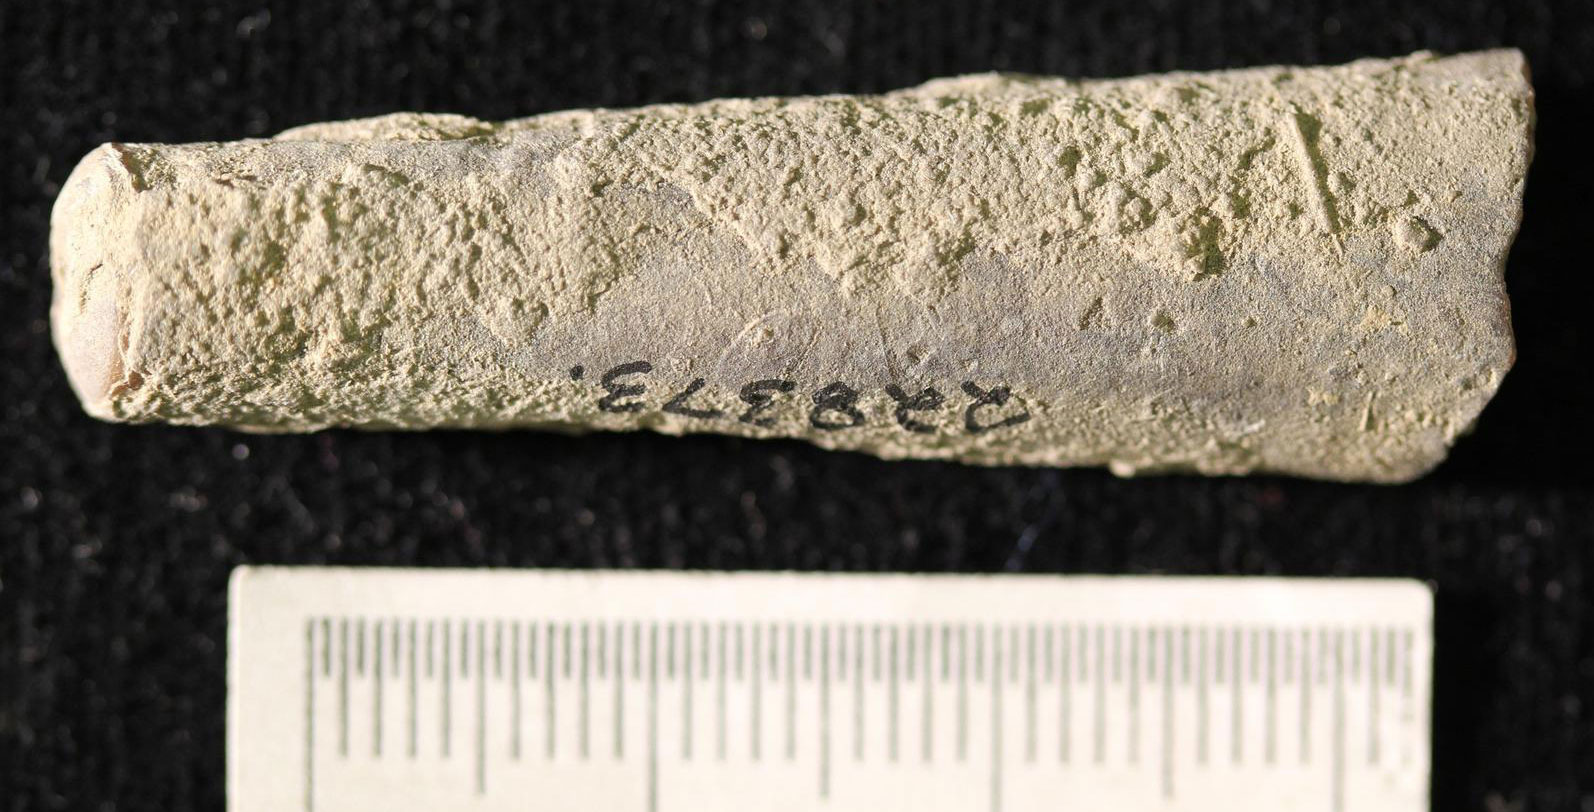 Photograph of the shell of a straight-shelled cephalopod from the Pennsylvanian French Creek Shale of Nebraska. The photo shows a slightly tapering shell, with the narrow end to the left. The color of the shell is dull beige.